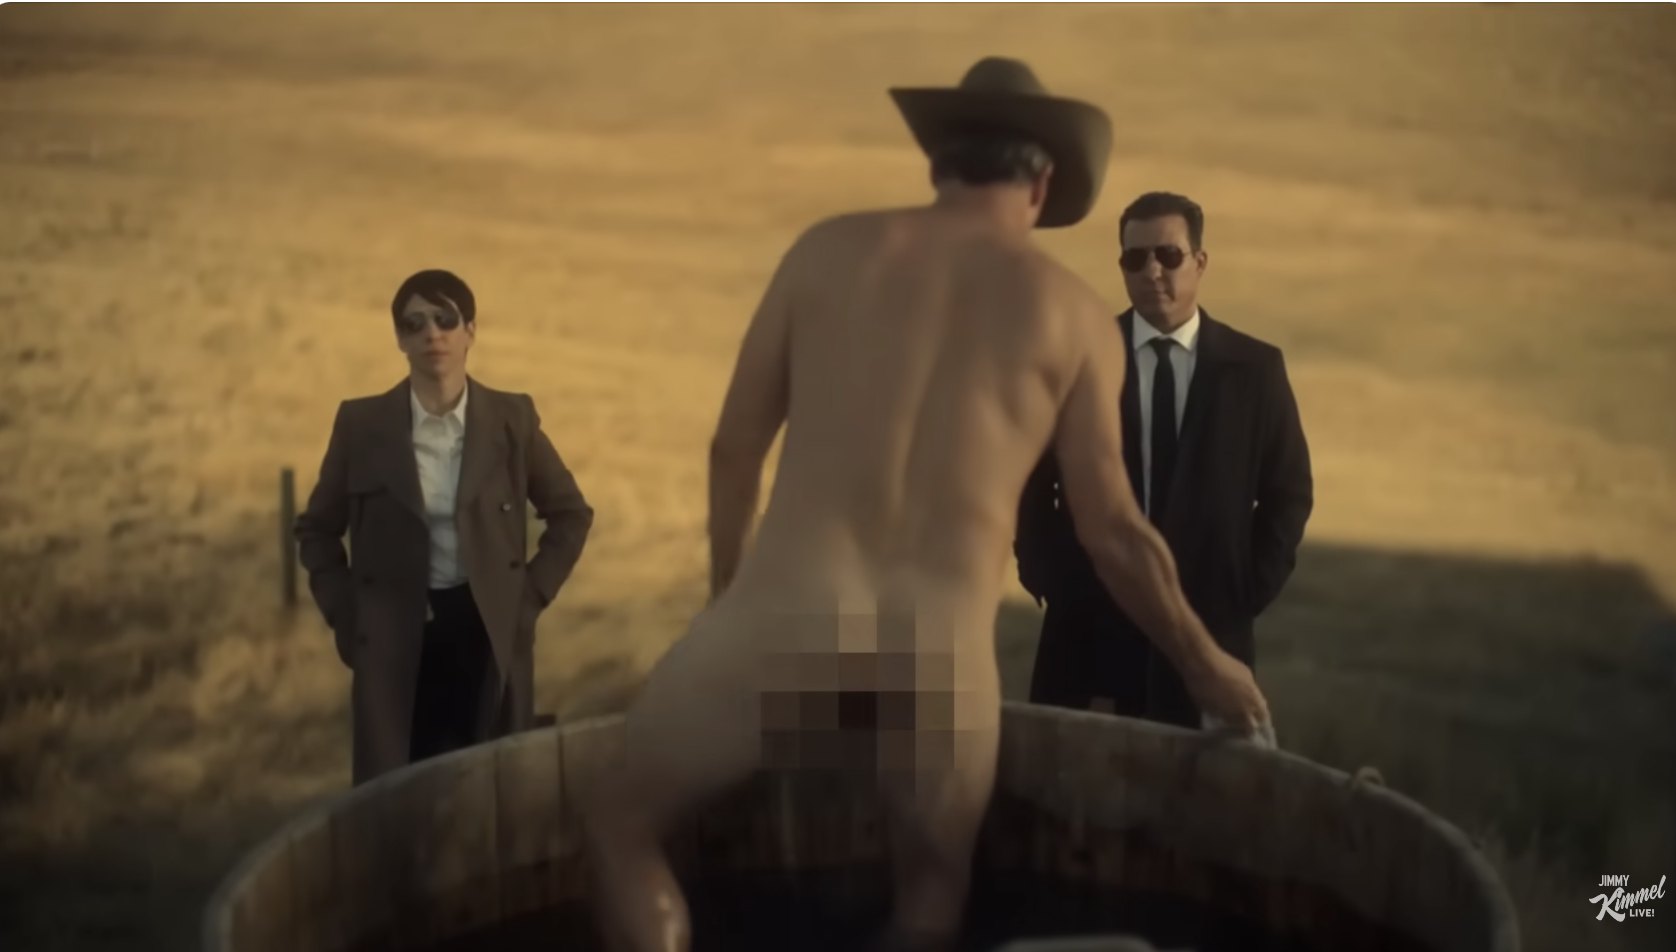 Jon Hamm nude from the back getting out of a tub in a scene from &quot;Fargo&quot;